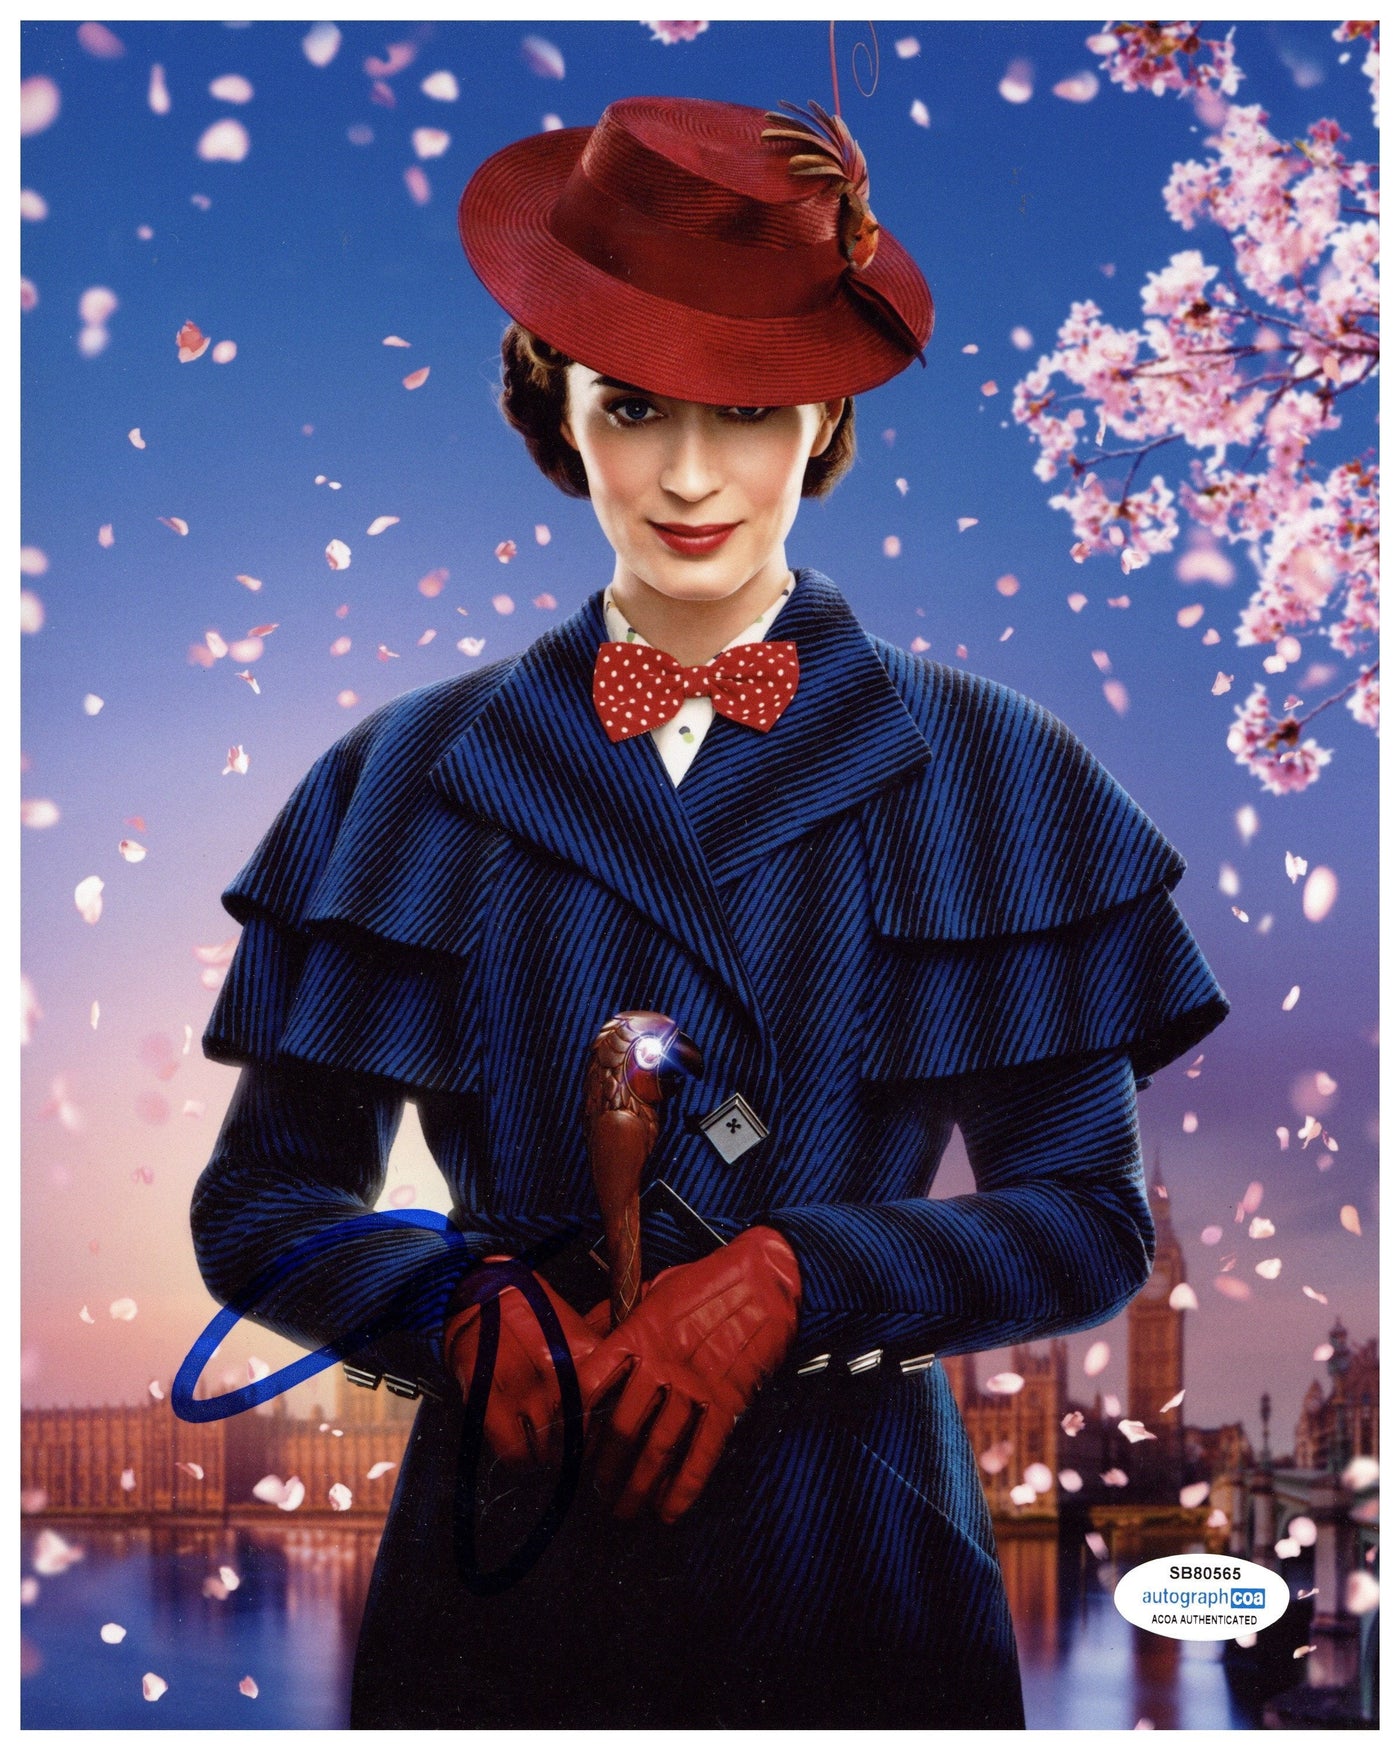 Emily Blunt Signed 8x10 Photo Mary Poppins Autographed ACOA #2